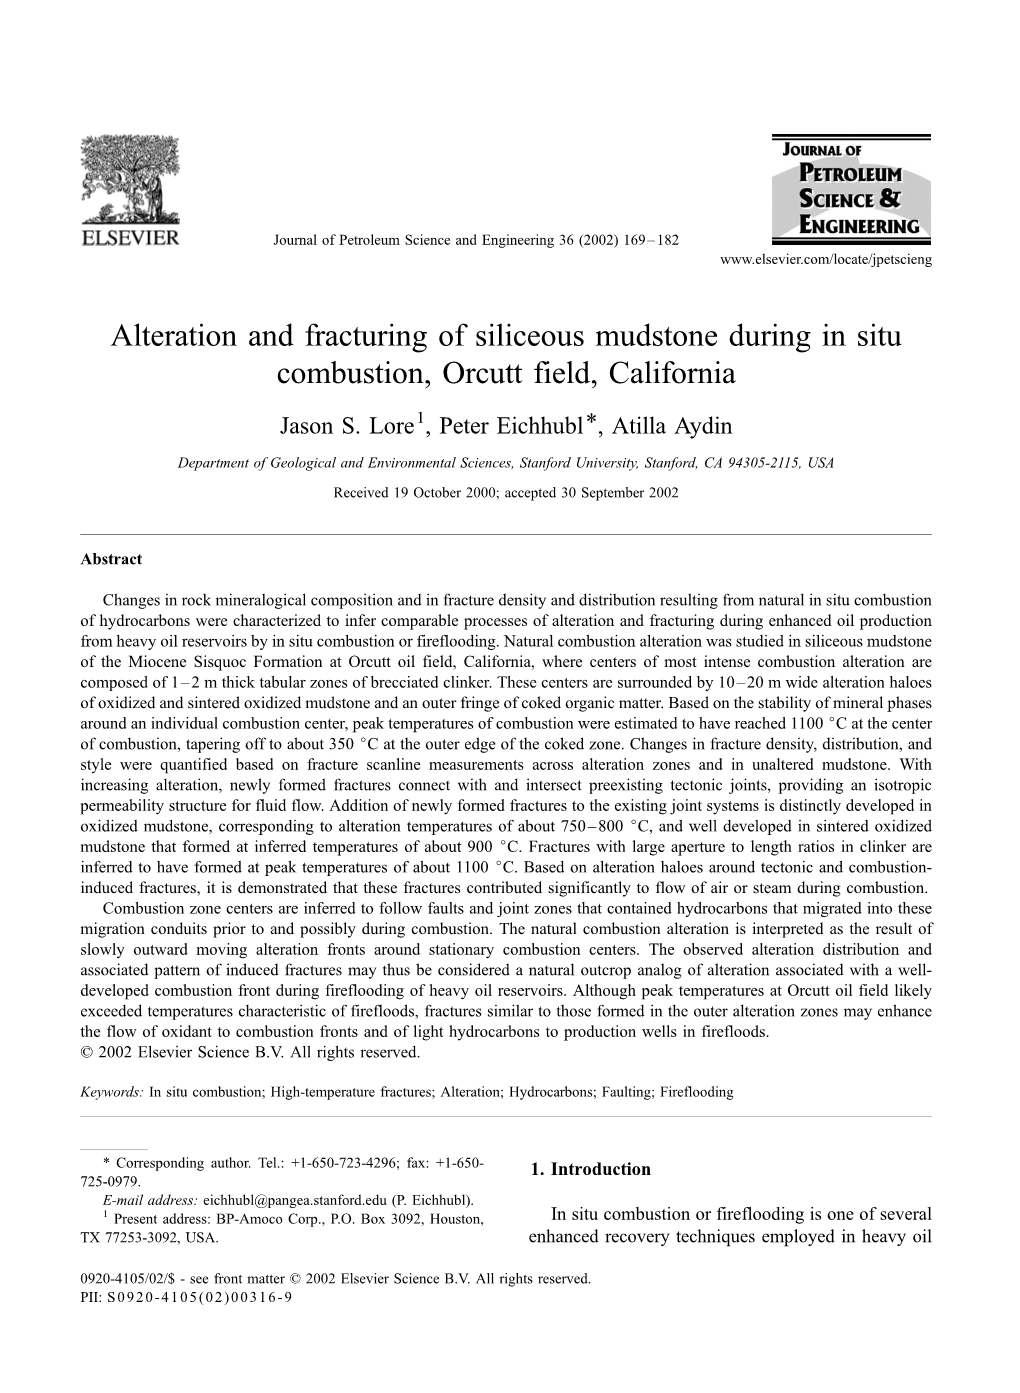 Alteration and Fracturing of Siliceous Mudstone During in Situ Combustion, Orcutt Field, California